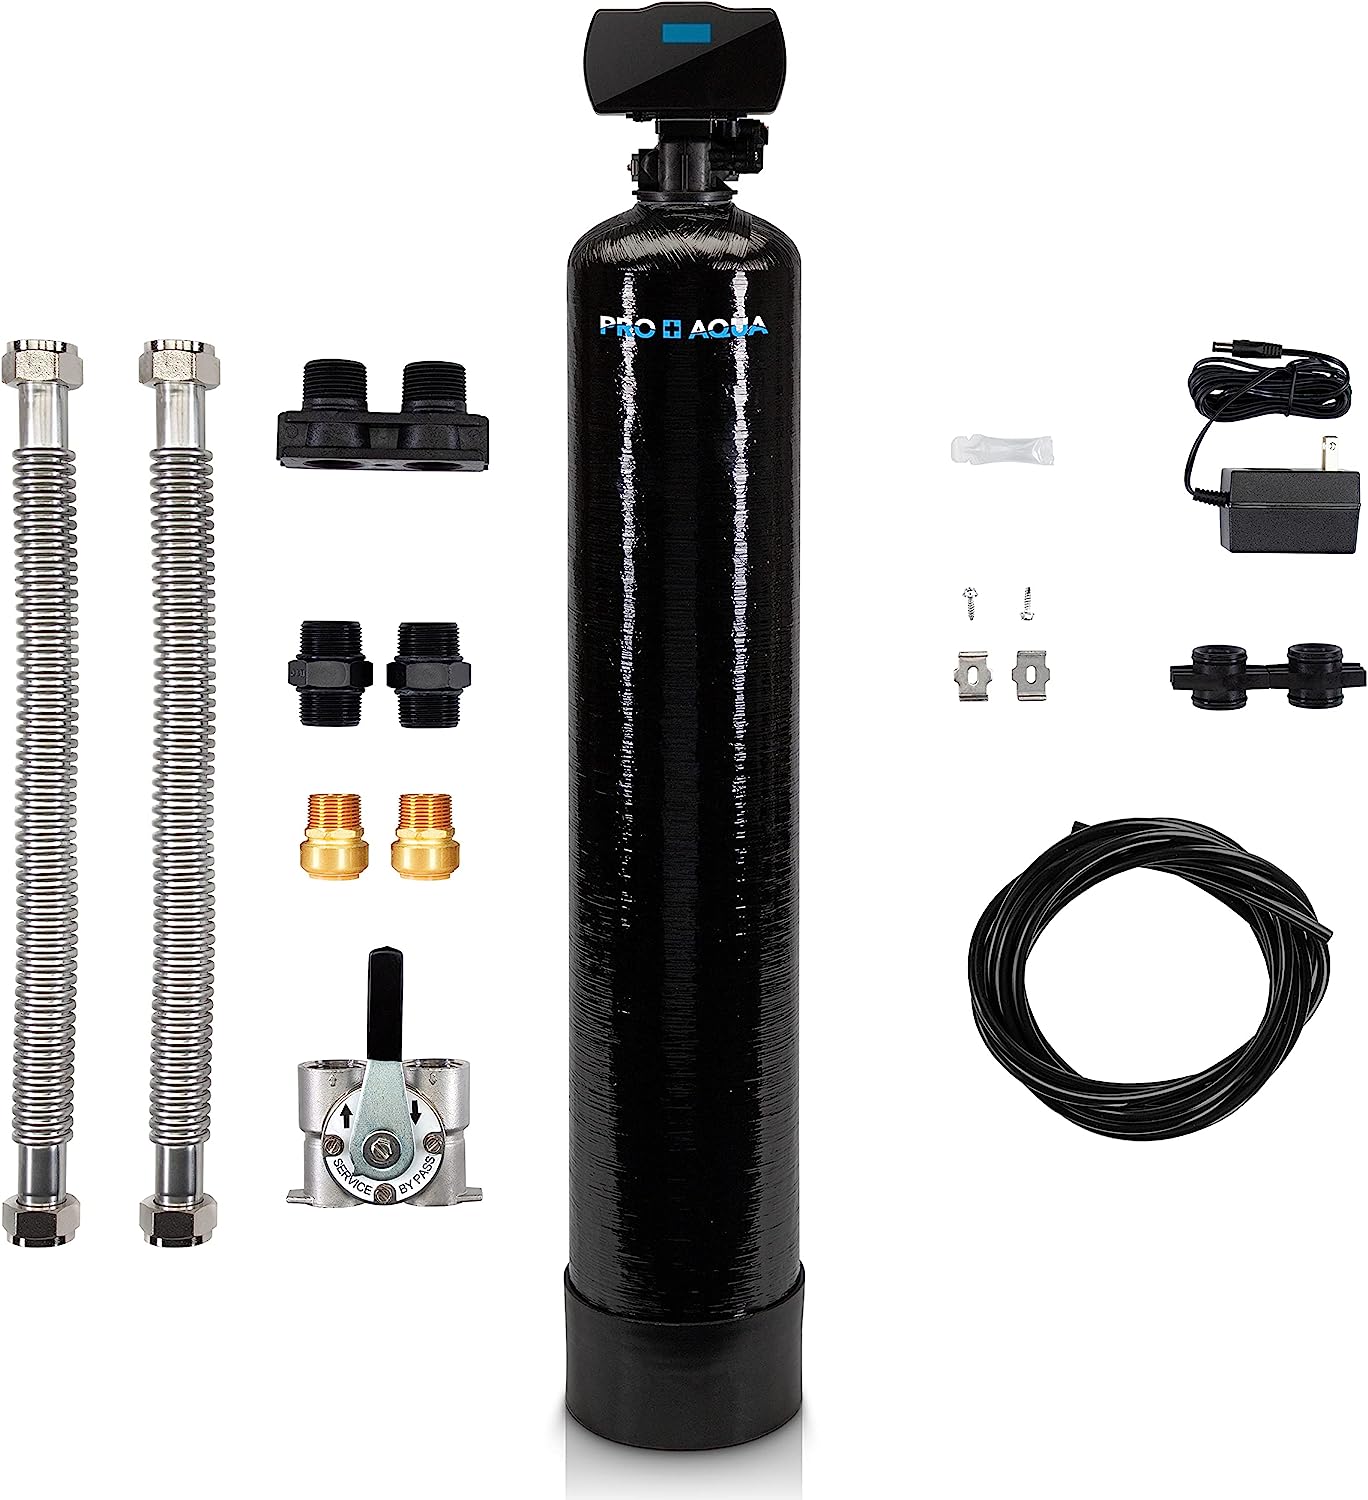 PRO+AQUA Whole House Filter System For Well Water, [...]